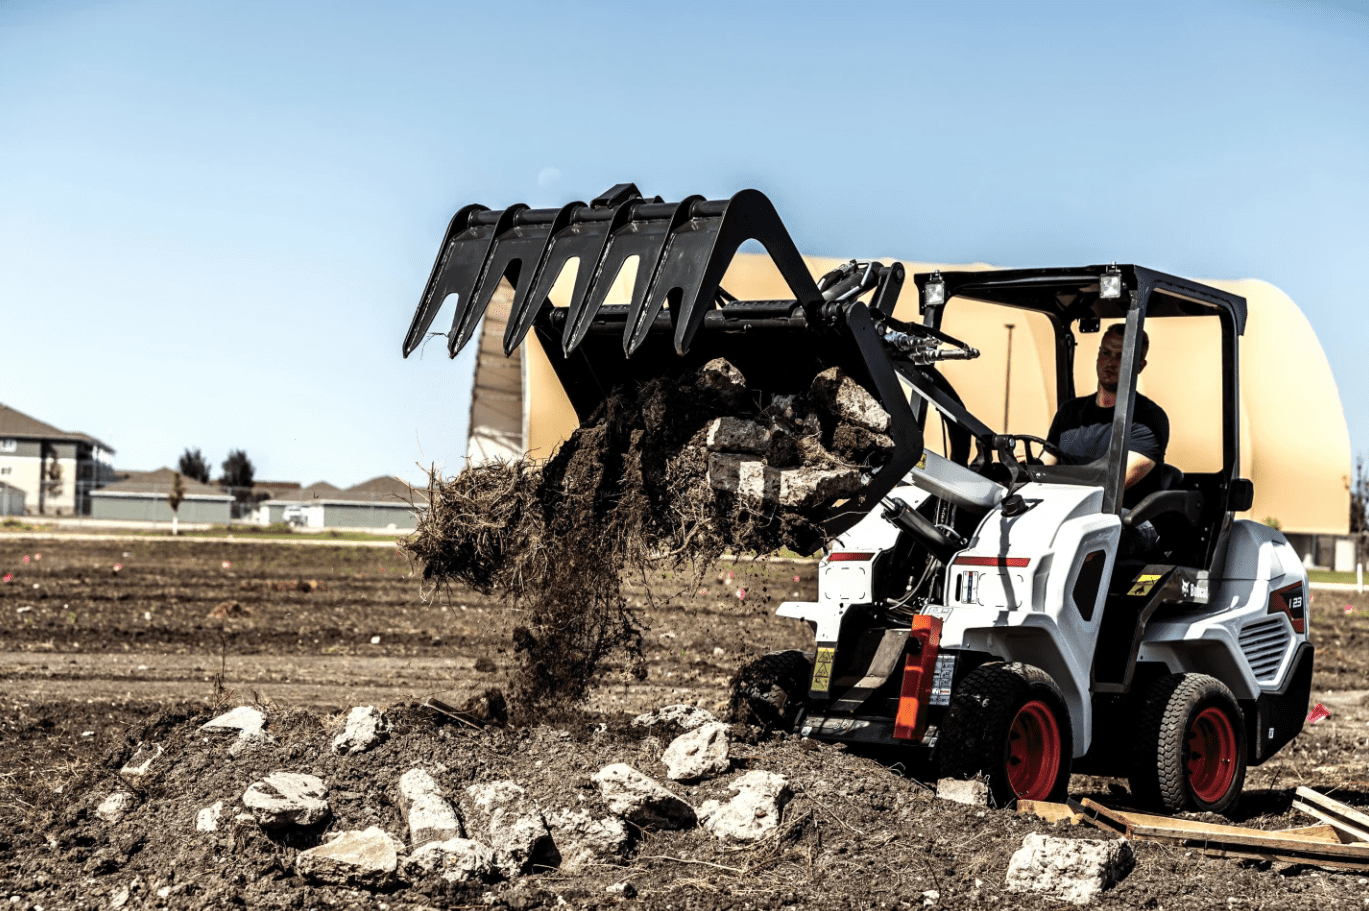 Browse Specs and more for the Bobcat L23 Small Articulated Loader - KC Bobcat